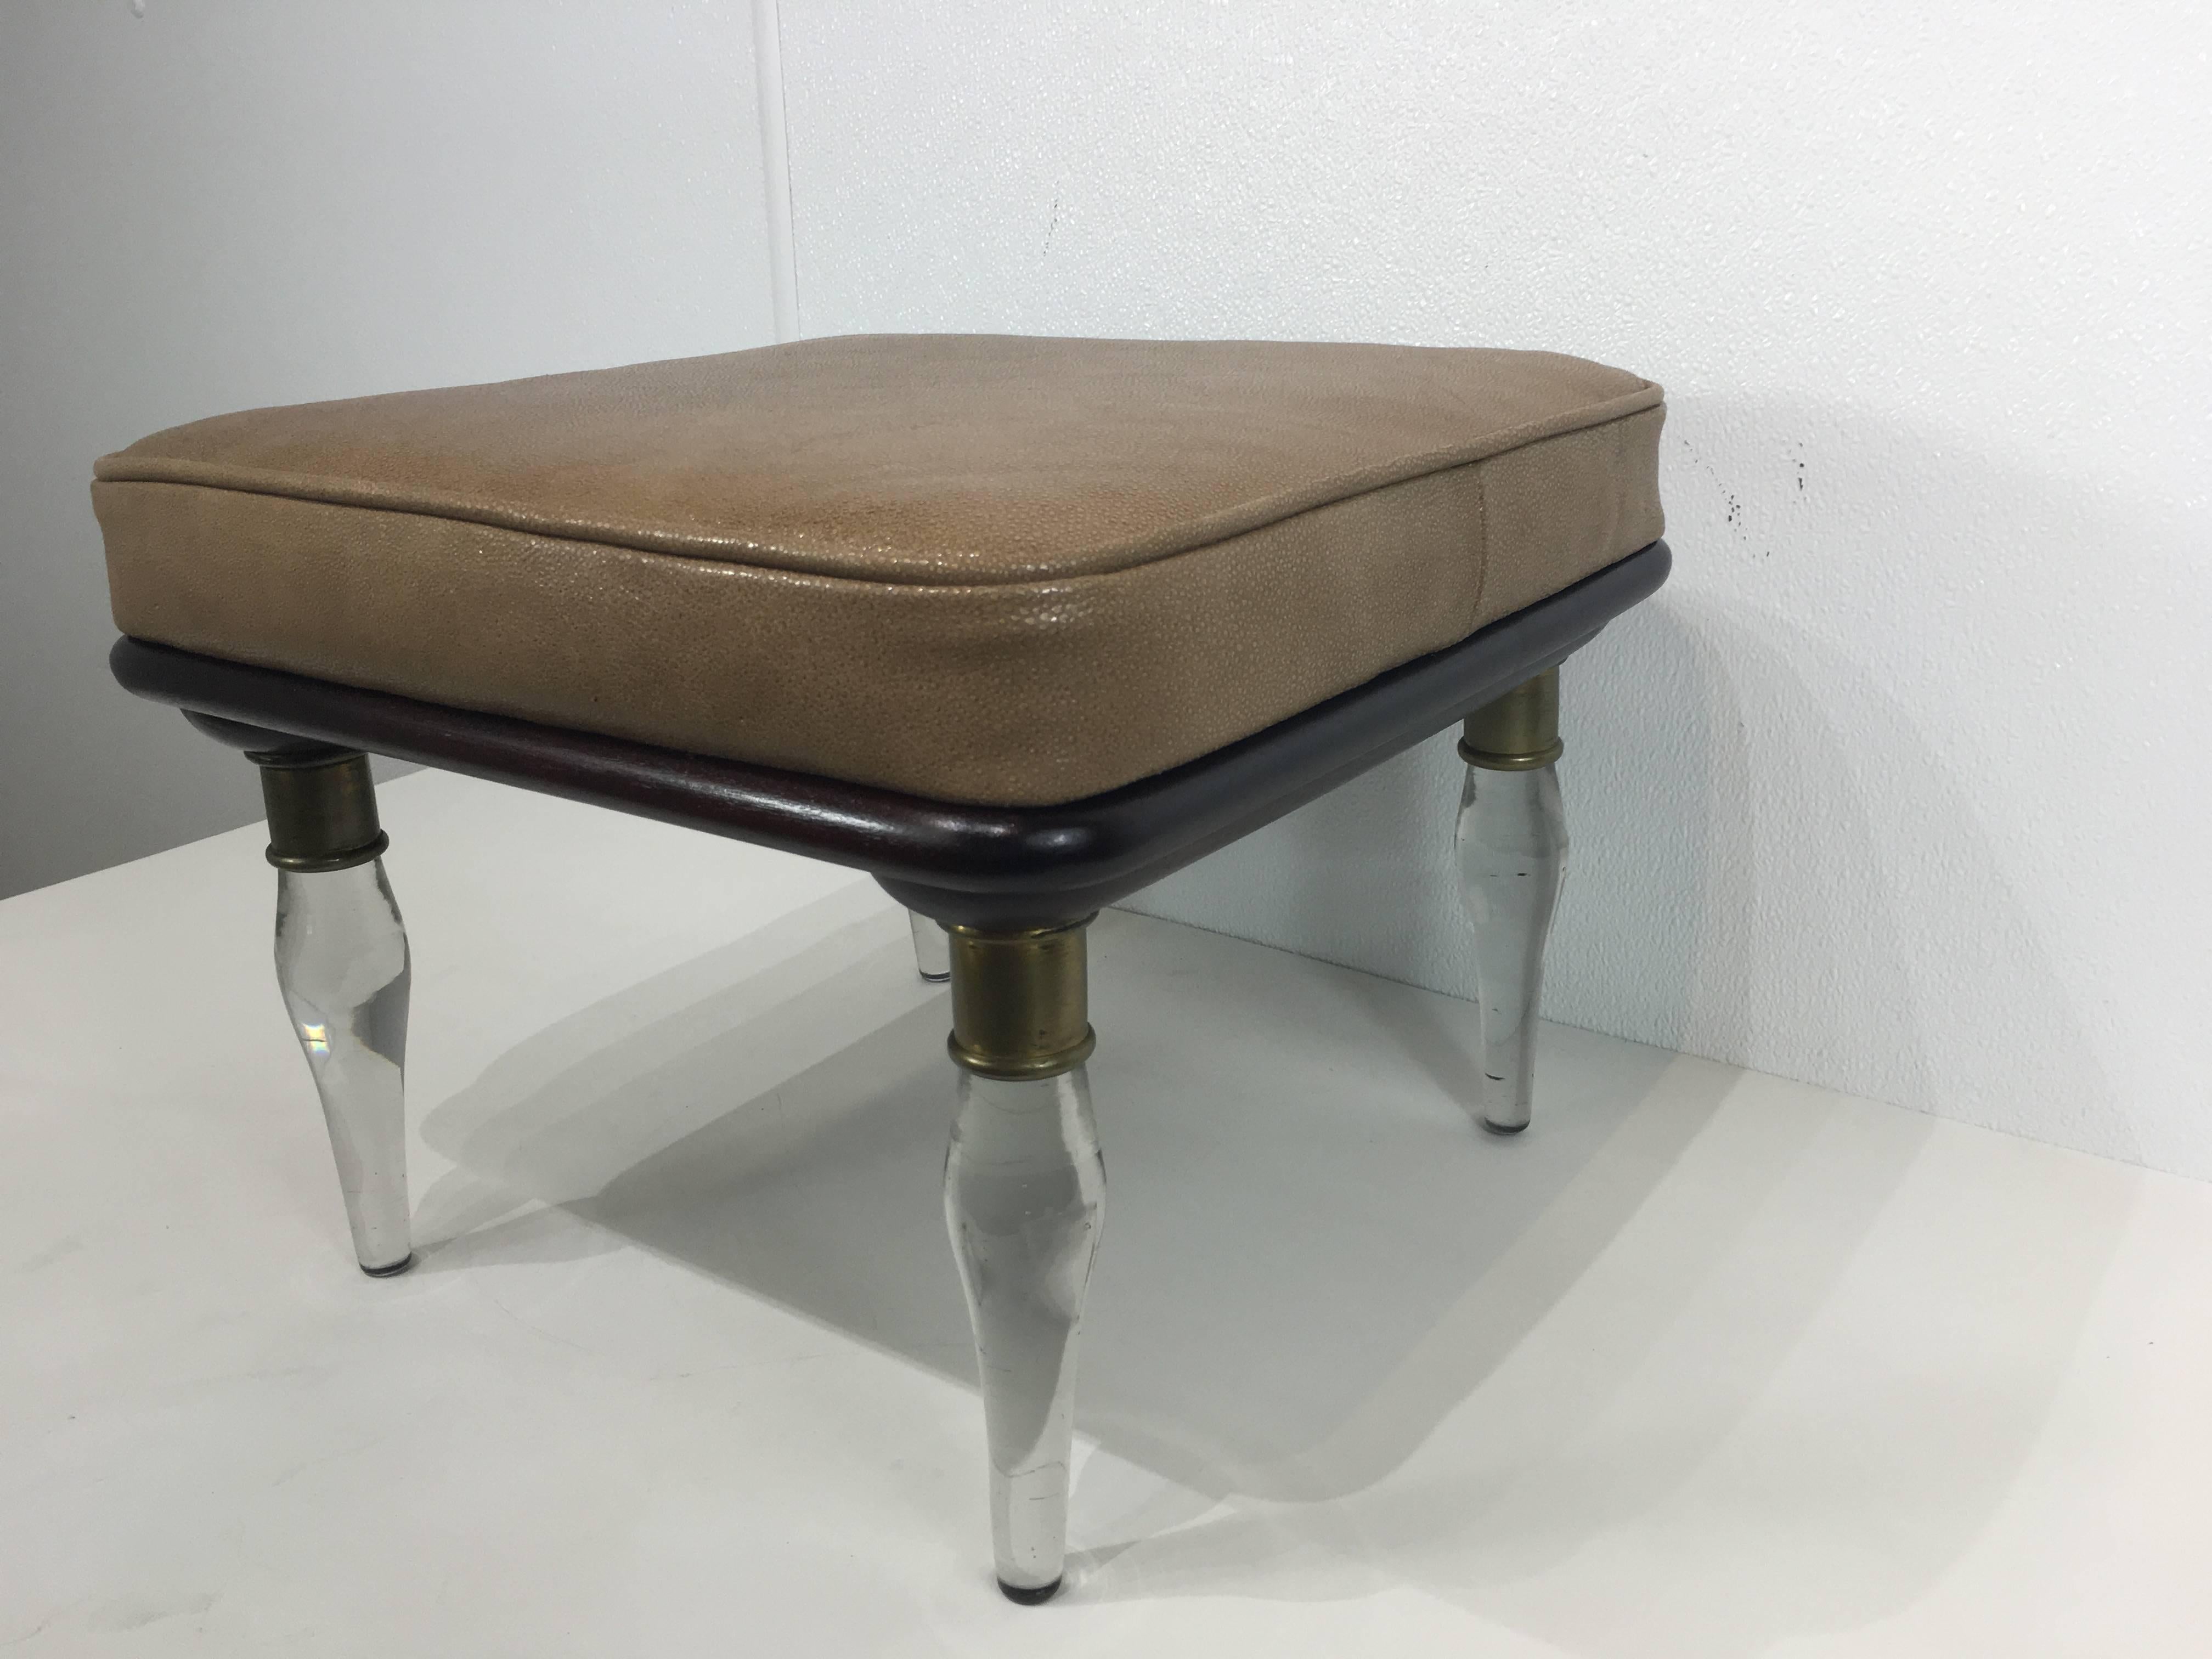 Murano glass foot stool of square form with newly upholstered leather cushion. Raised on four brass mounted clear Murano glass legs.